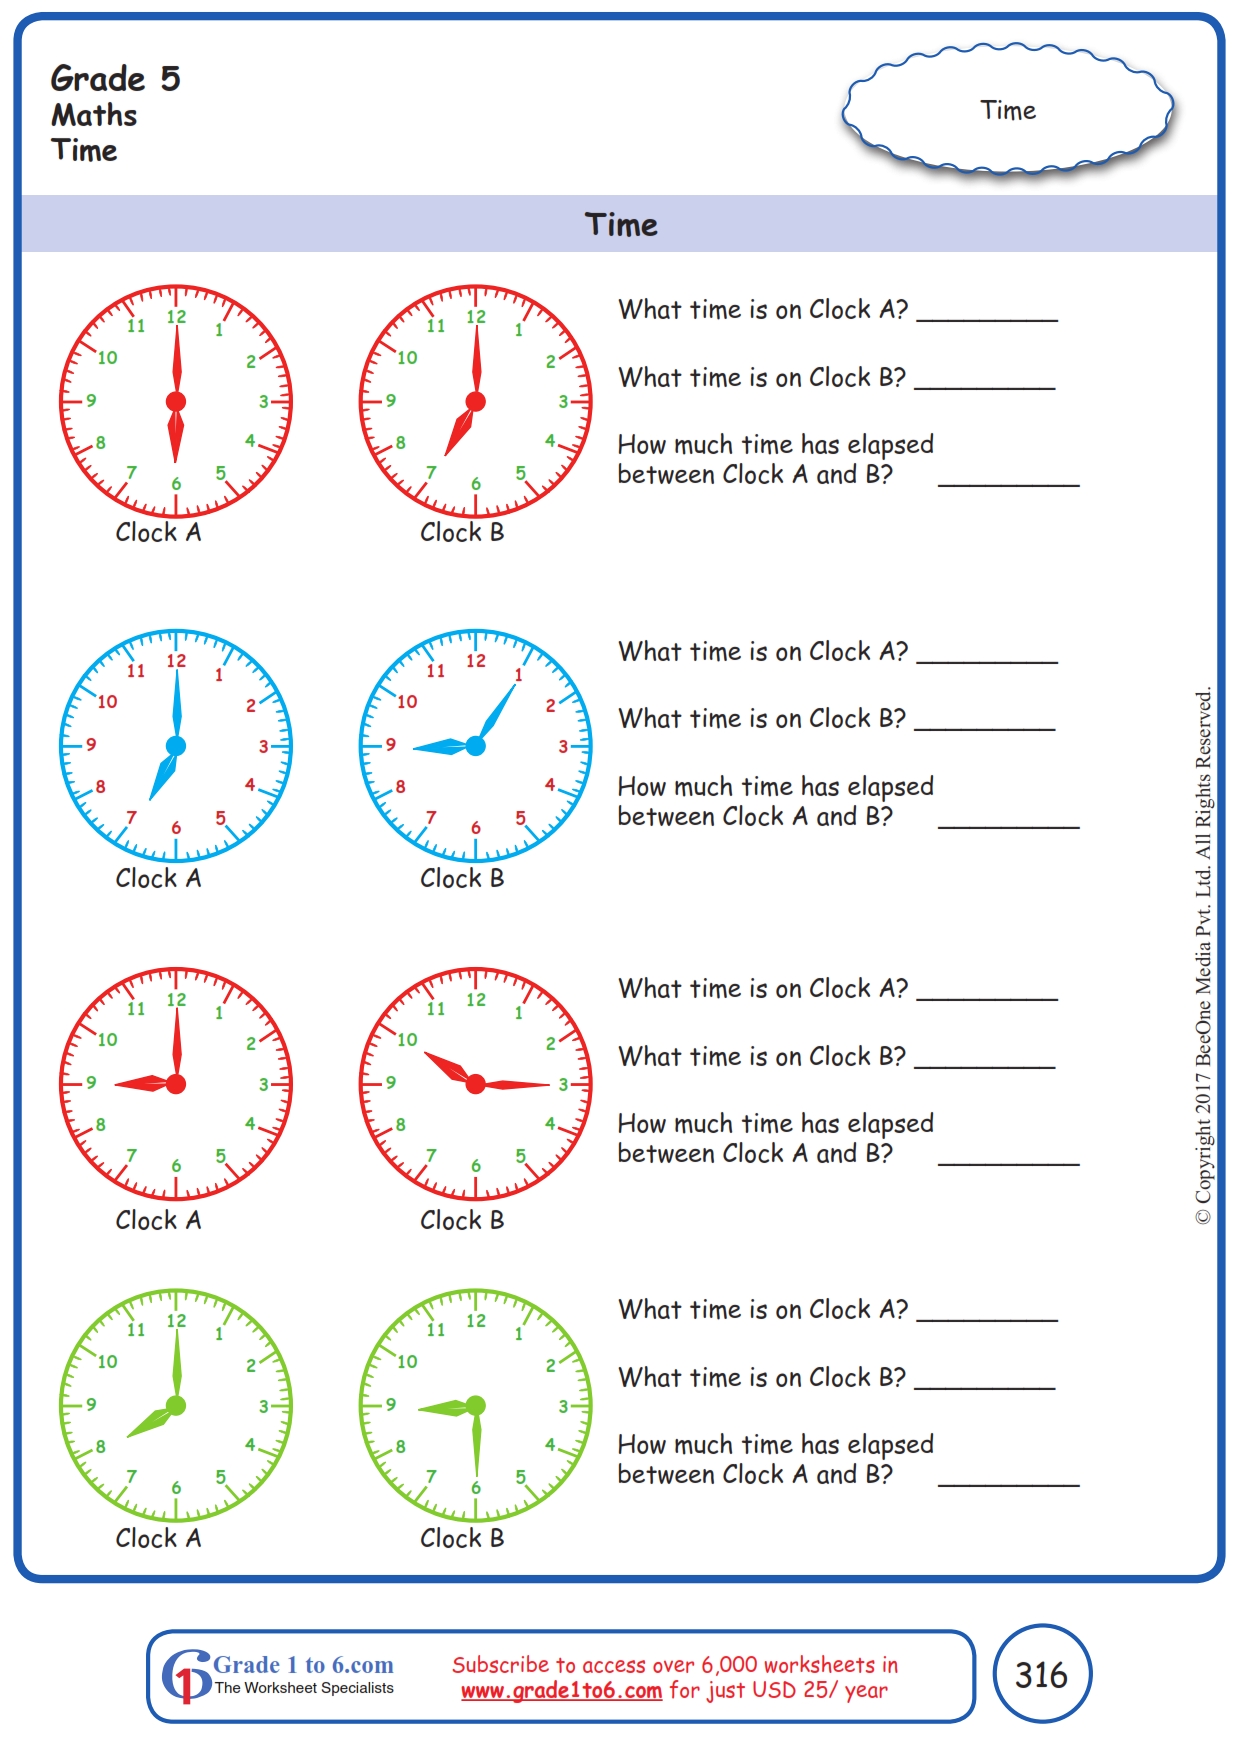 Telling Time Worksheets| Grade 5|www.grade1to6.com